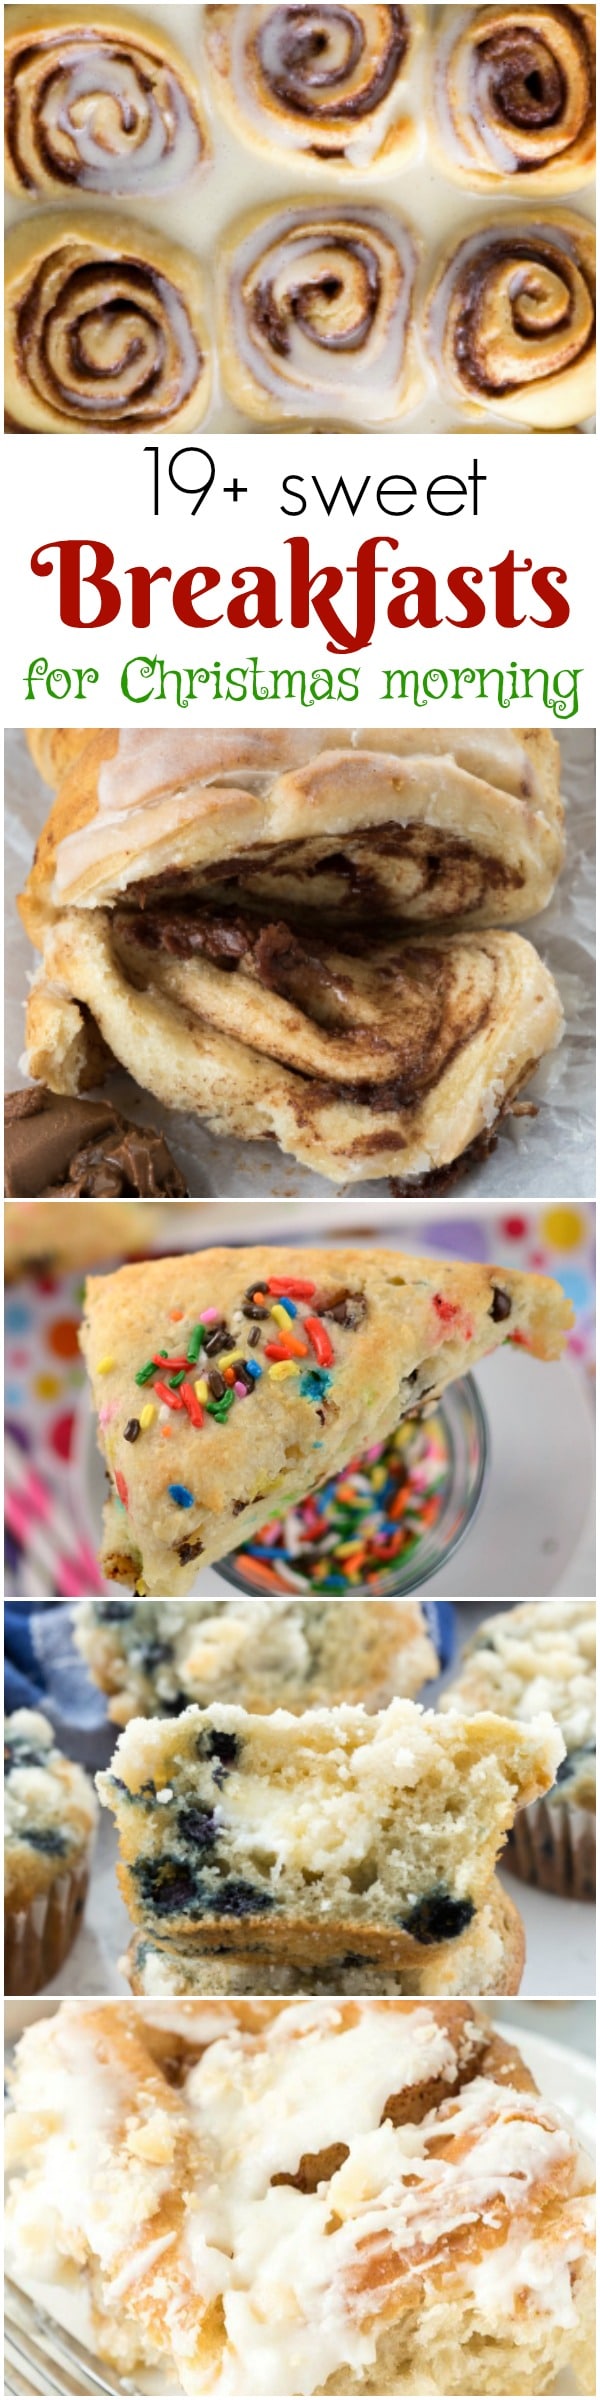 19 Sweet Breakfast Recipes perfect for Christmas morning! Cinnamon rolls, bread, scones, muffins, and more!